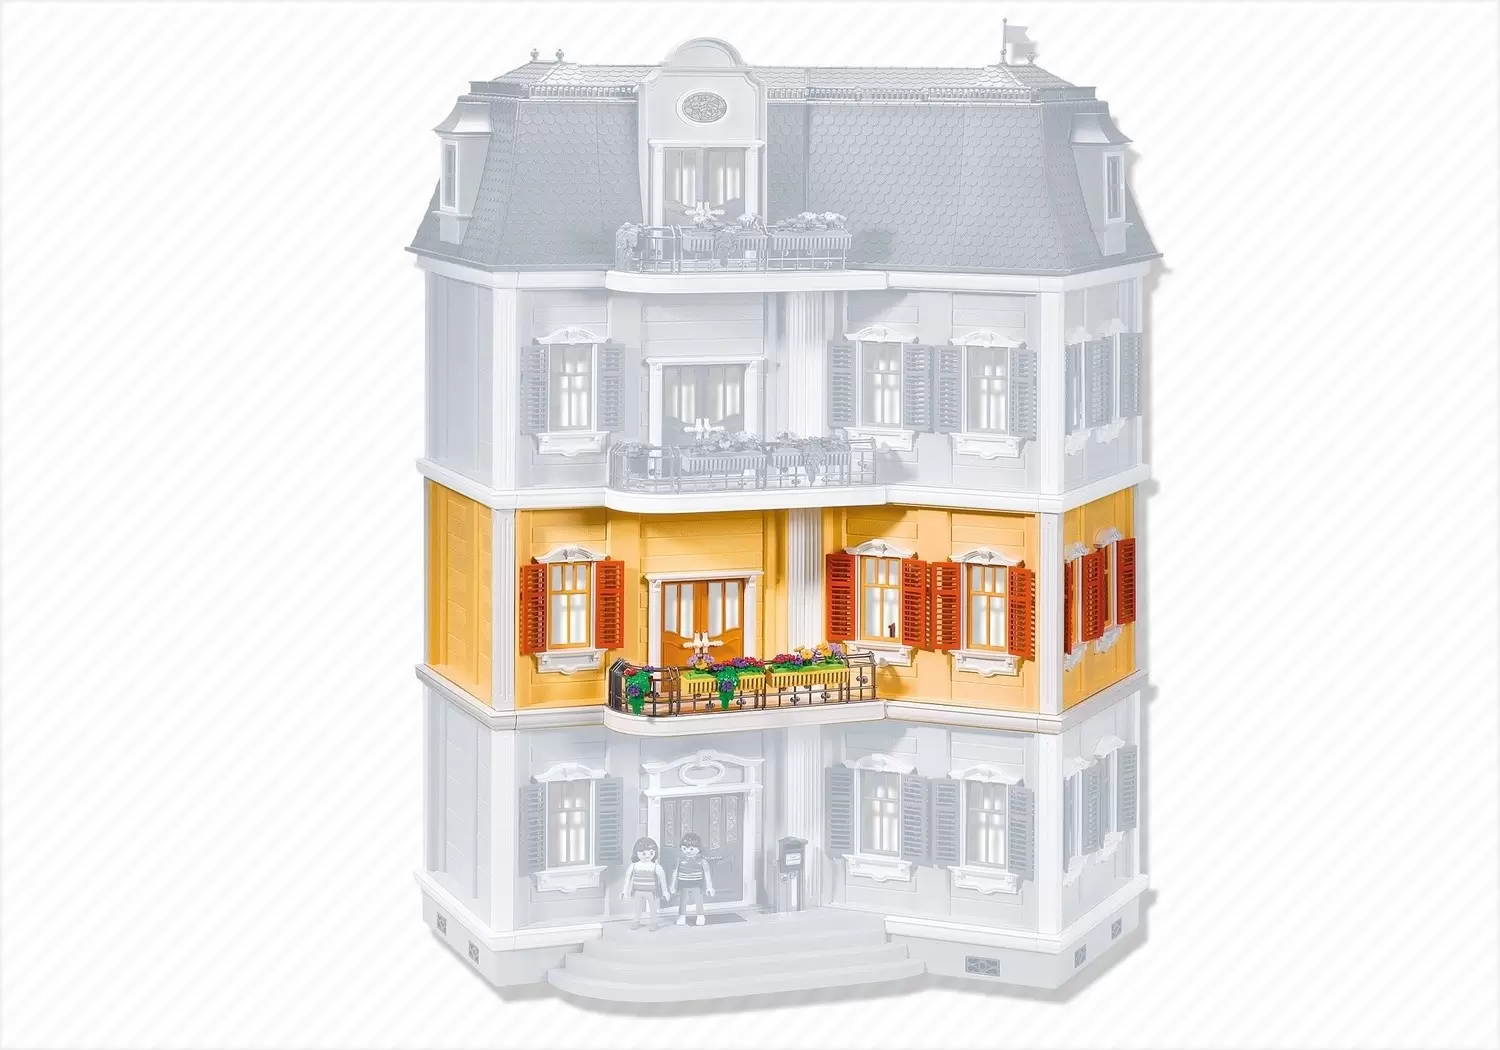 Playmobil Accessories & decorations - Floor Extension for 5302 Grande Mansion